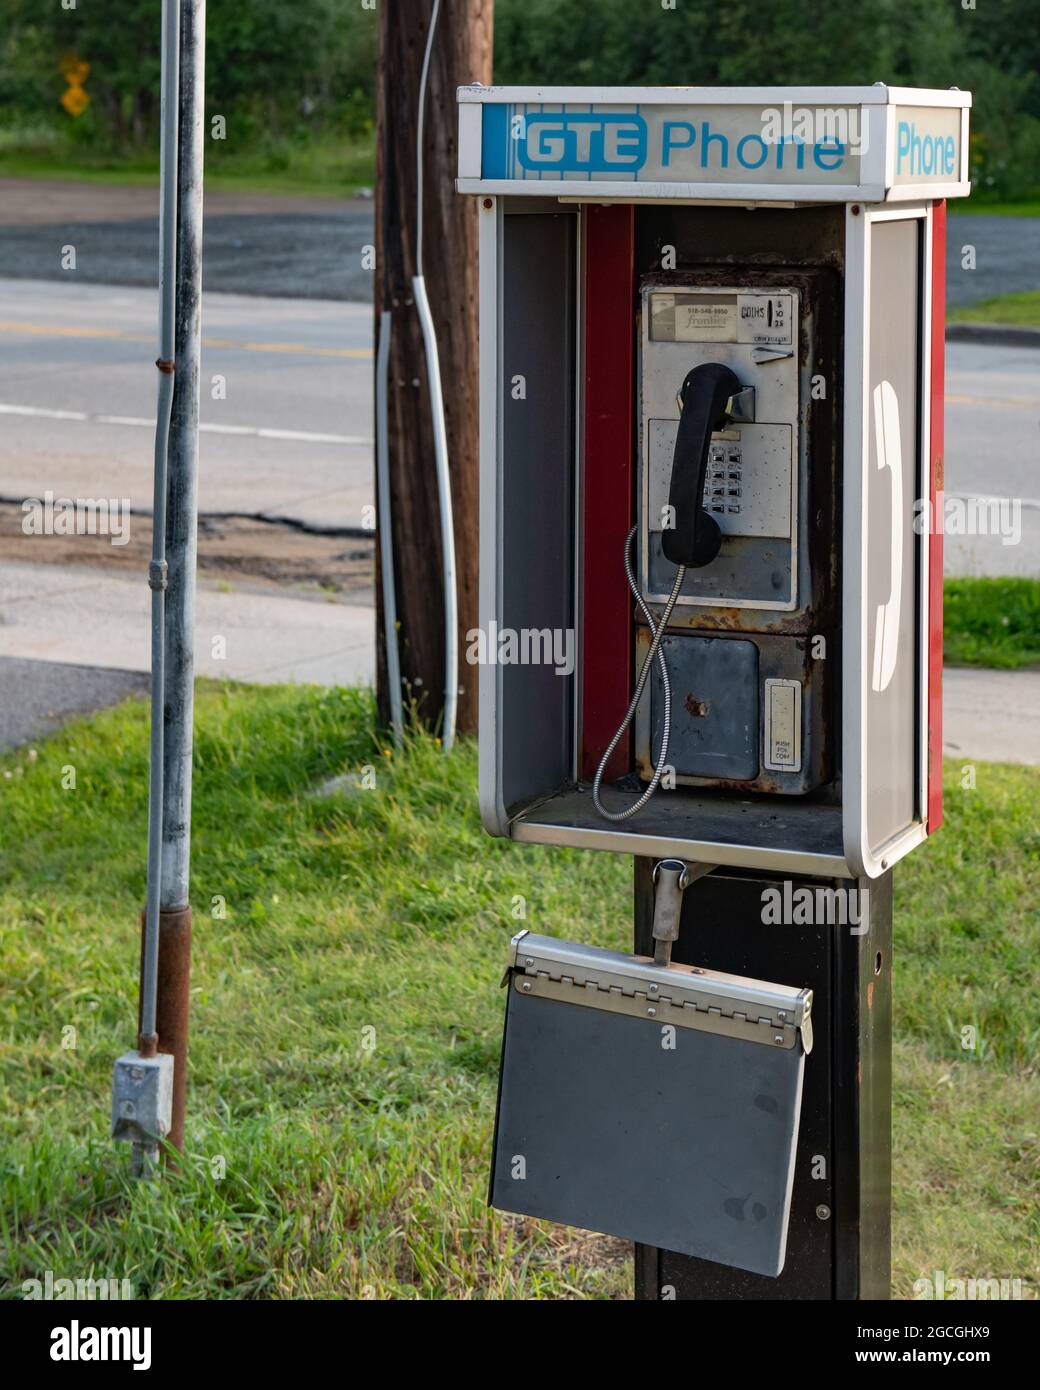 A deteriorating rusty pay phone with phone book in Speculator, NY USA Stock Photo